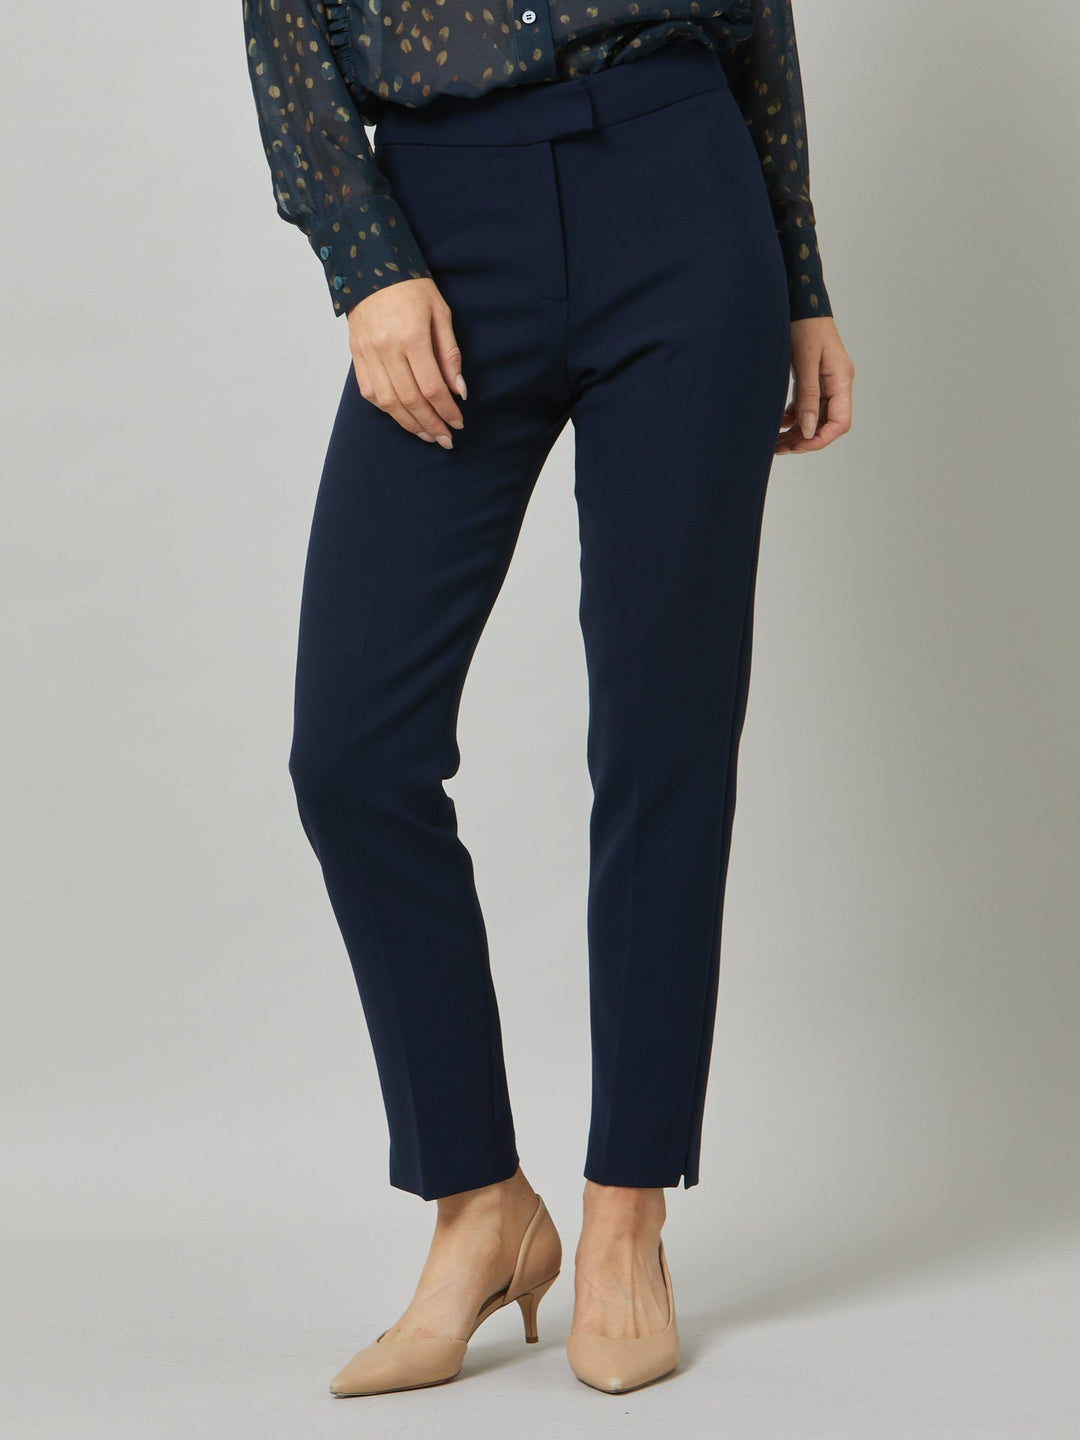 Jill makes a triumphant return! These narrow leg trousers are a must-have for investment-worthy style, providing a sleek and impeccably tailored silhouette. Made with a touch of stretch, they offer not only a polished look but also enhanced comfort. With an ankle-grazing length, a fly front, and a clean flat front that sits naturally on the waist, these trousers exude sophistication.